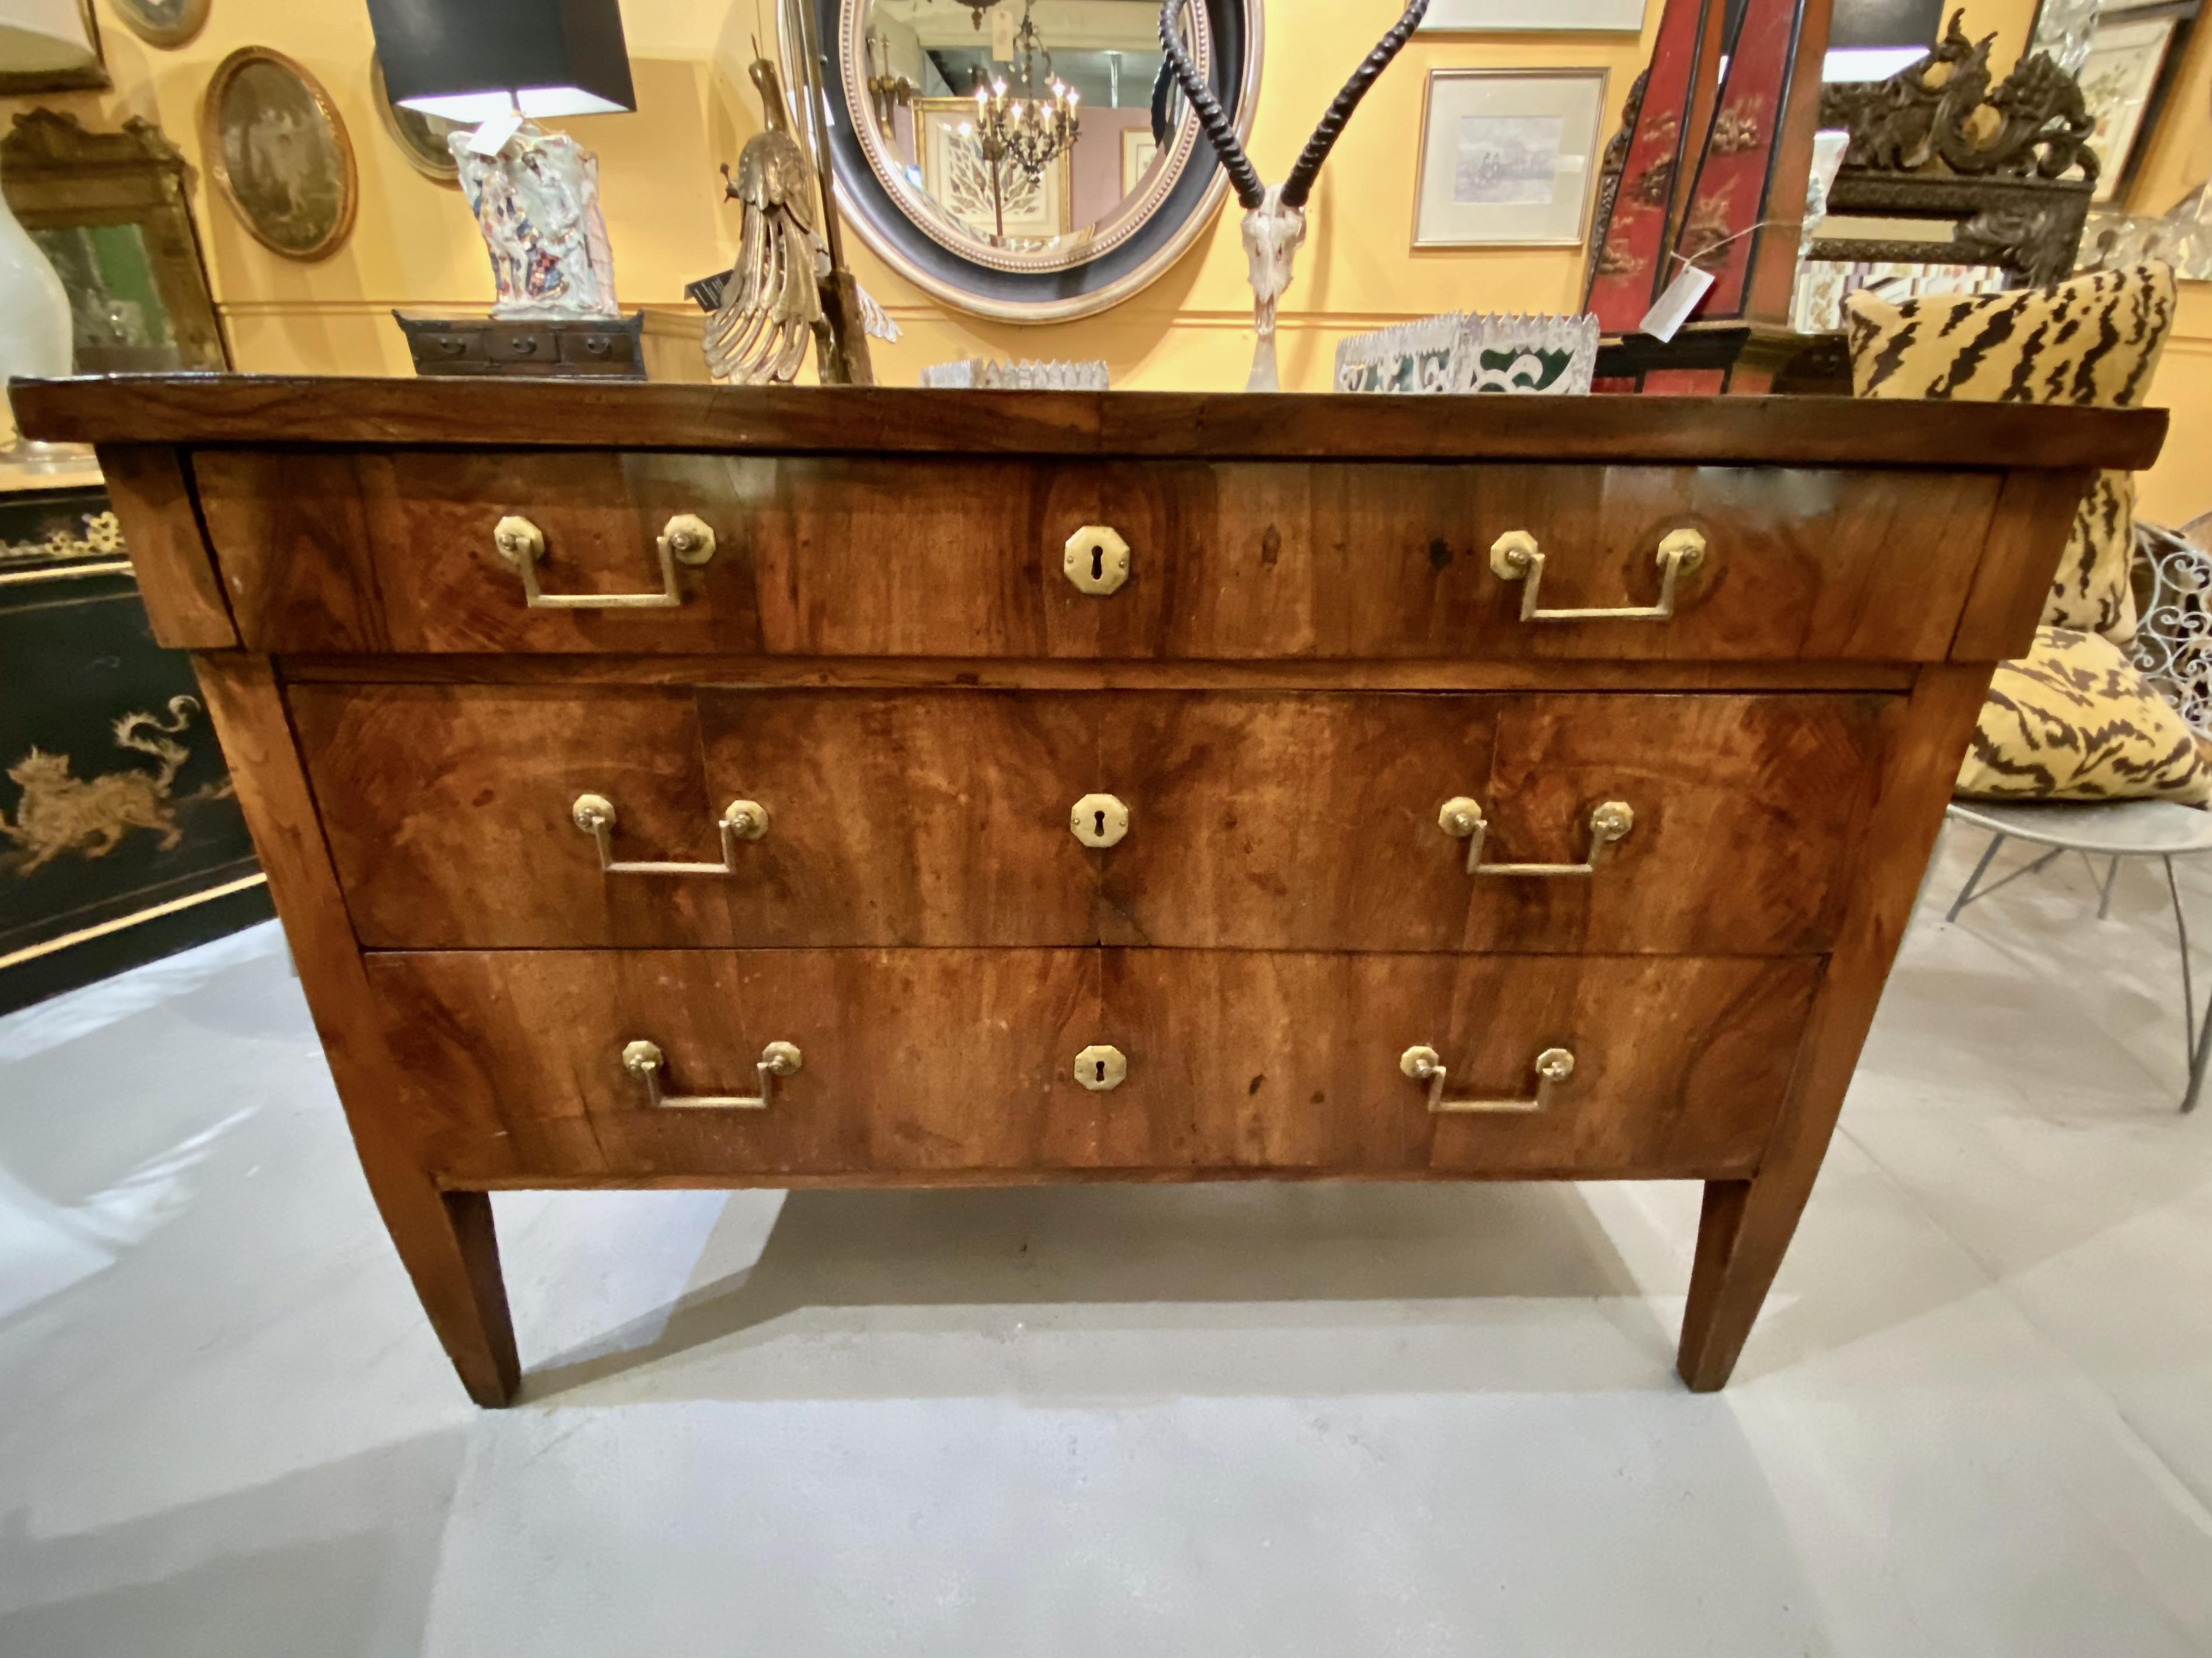 This is a late 18th/early 19th century Italian 3-drawer commode. The commode is beautifully crafted of book-matched figured walnut which retains a superb rich natural patina. The chest is in very good original condition with normal age-related